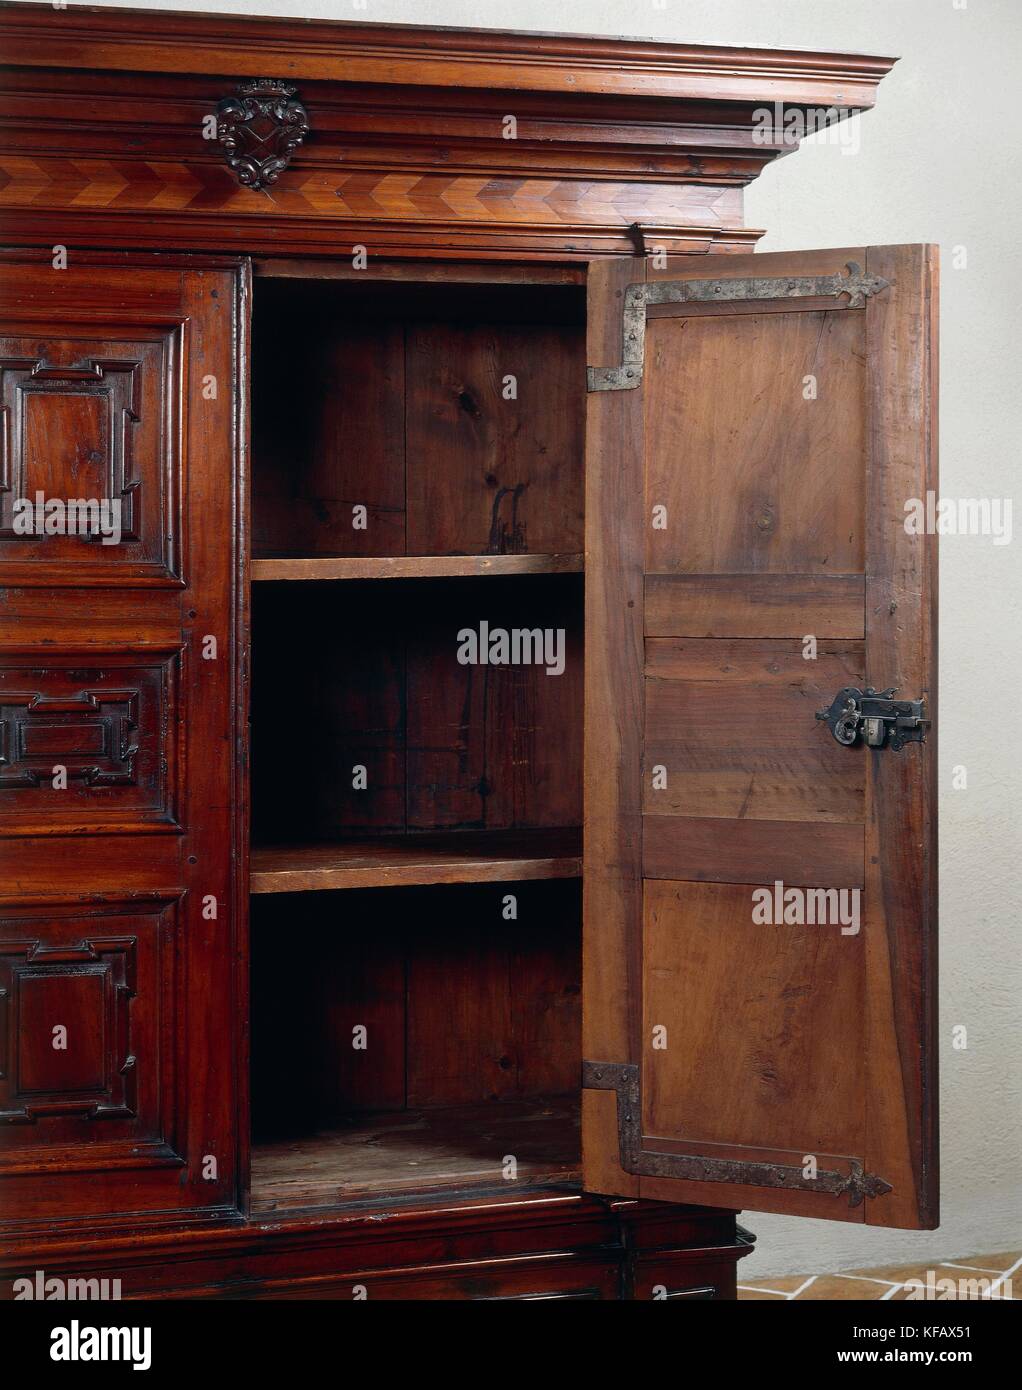 Italian, seventeenth century. Cabinet in walnut with inlays of maple production in Lombardy. First half of the seventeenth century. Particular. Stock Photo